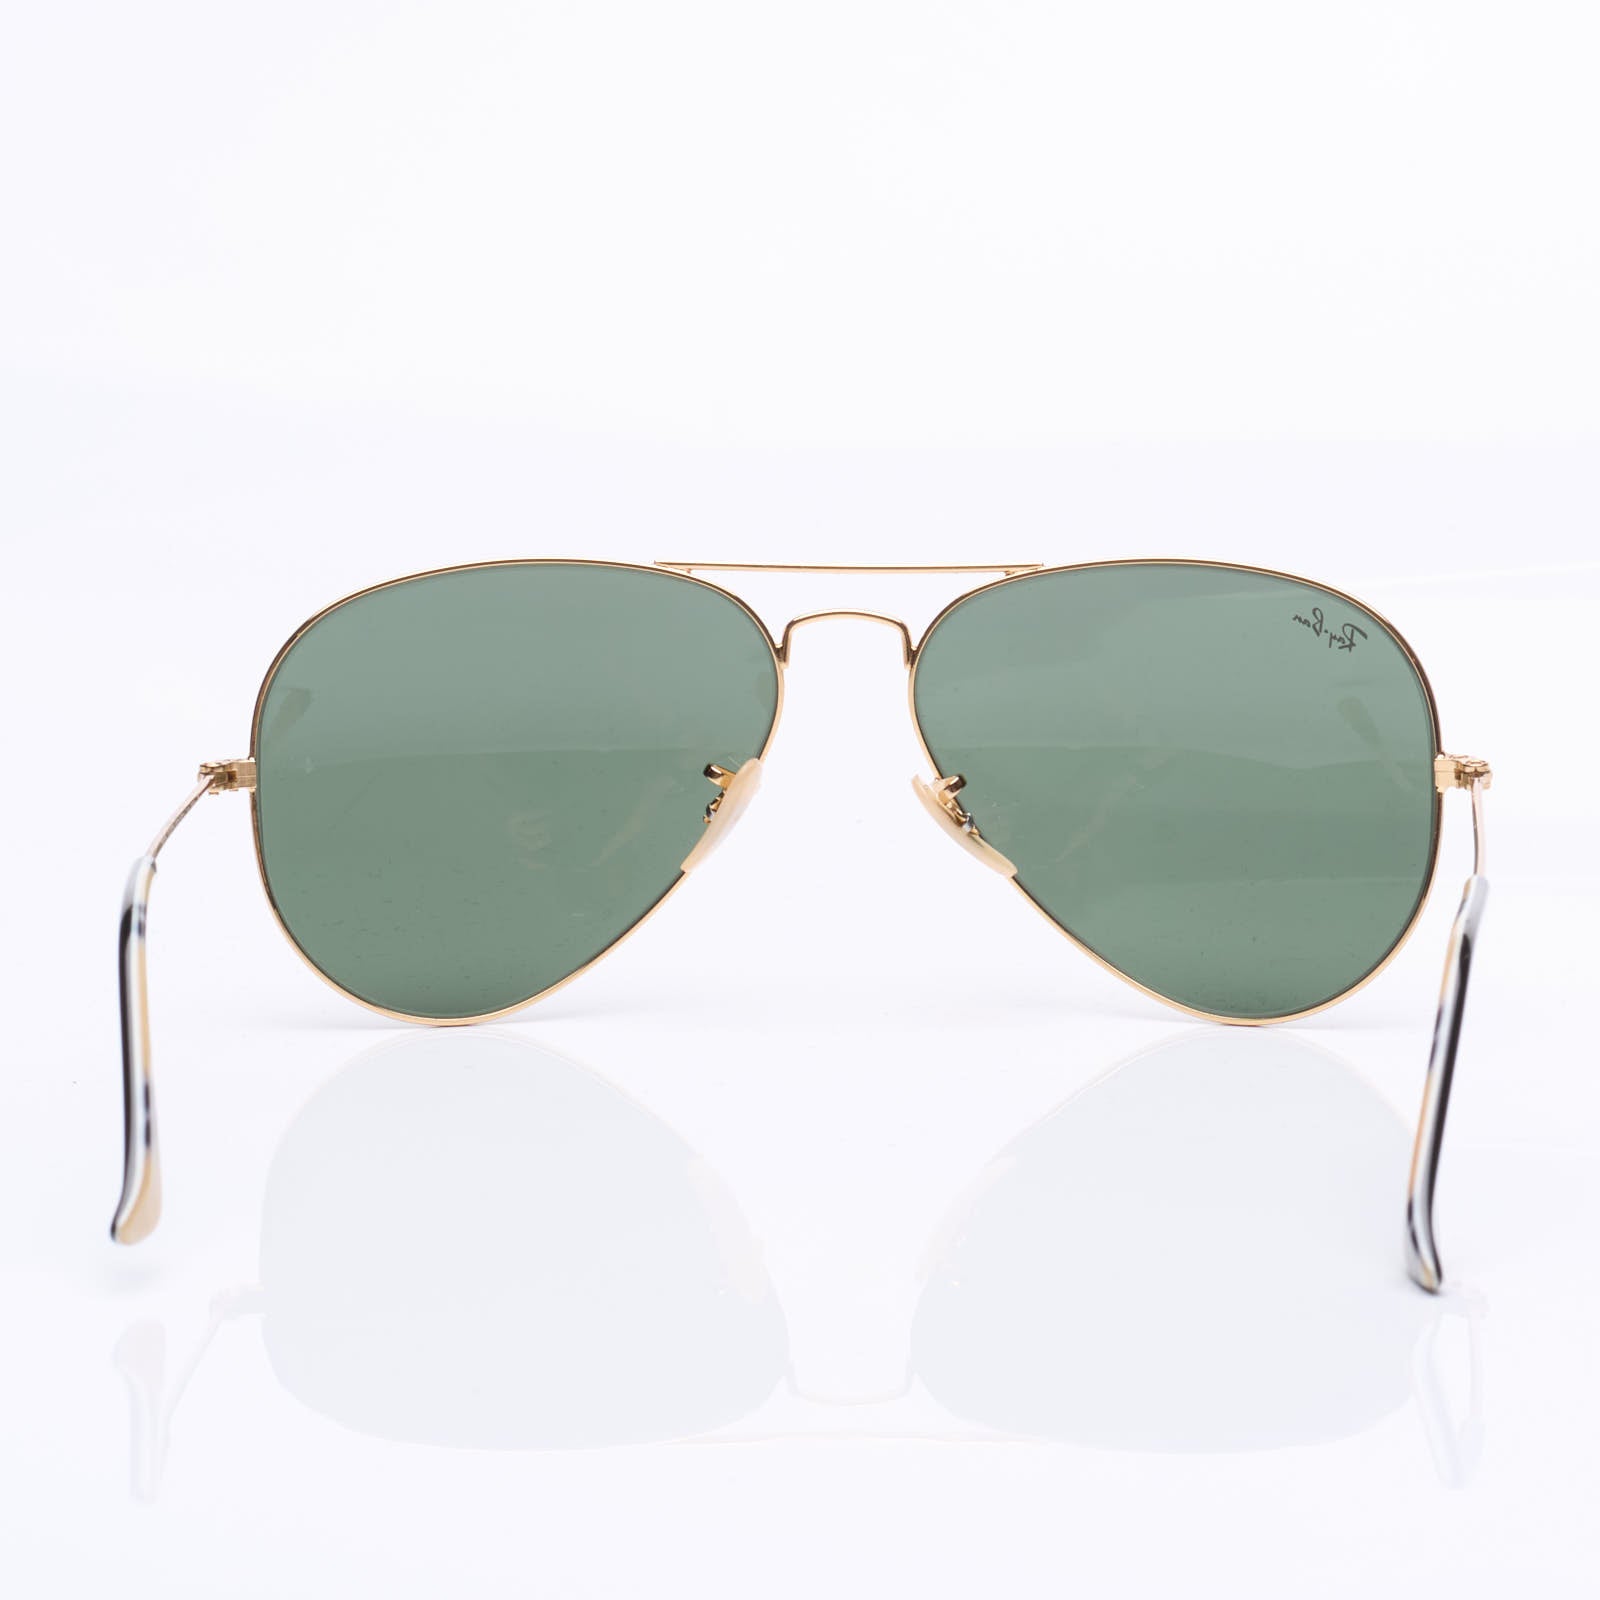 RAY BAN Brooks Brothers Aviator 58/14 Gold Pilot Sunglasses Limited Edition 2011